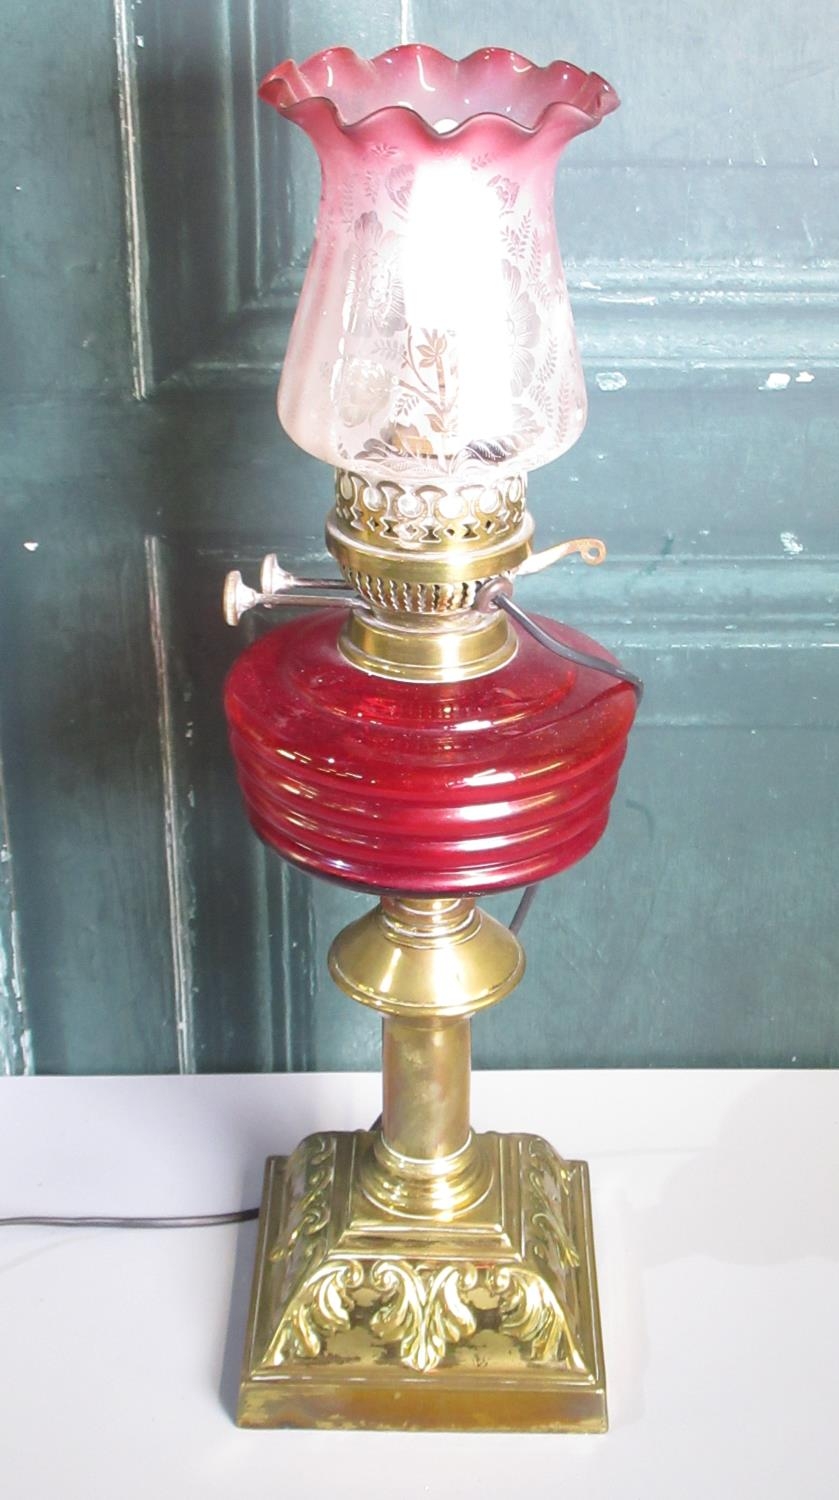 20th century brass oil lamp, with red glass reservoir and cranberry tint etched shade, now converted